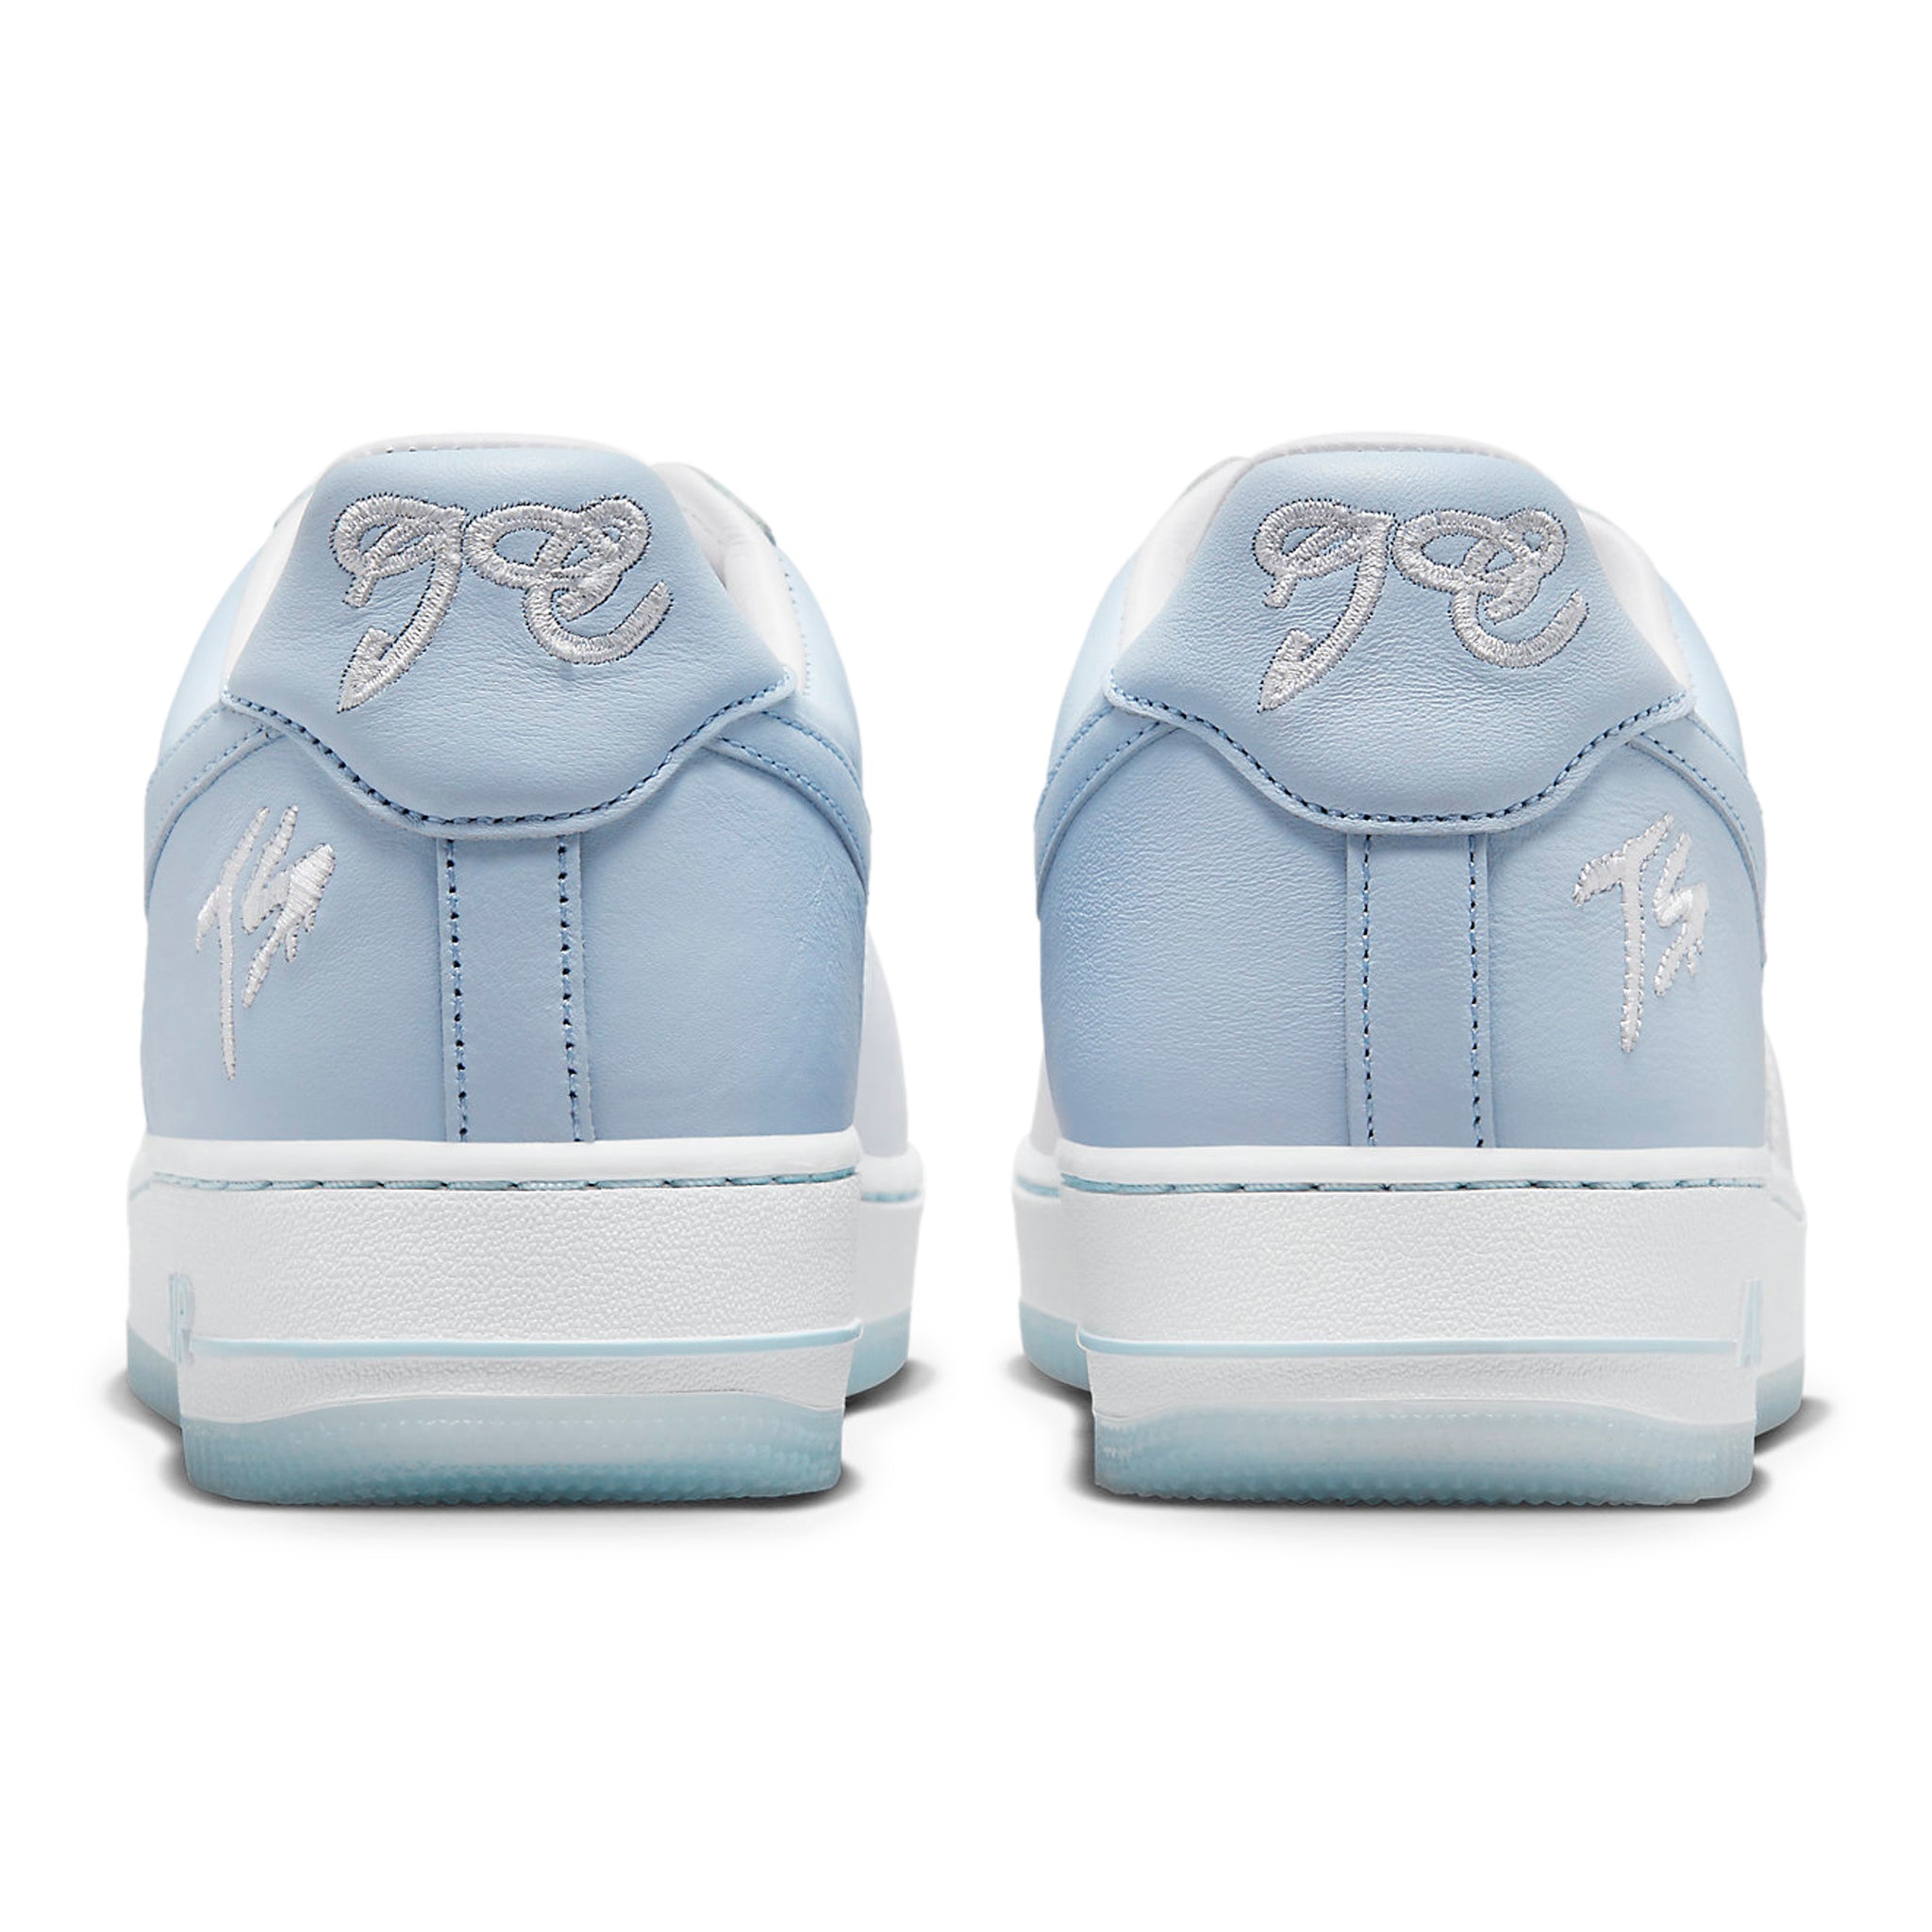 Back view of Terror Squad x Nike Air Force 1 Low Loyalty FJ5755-100